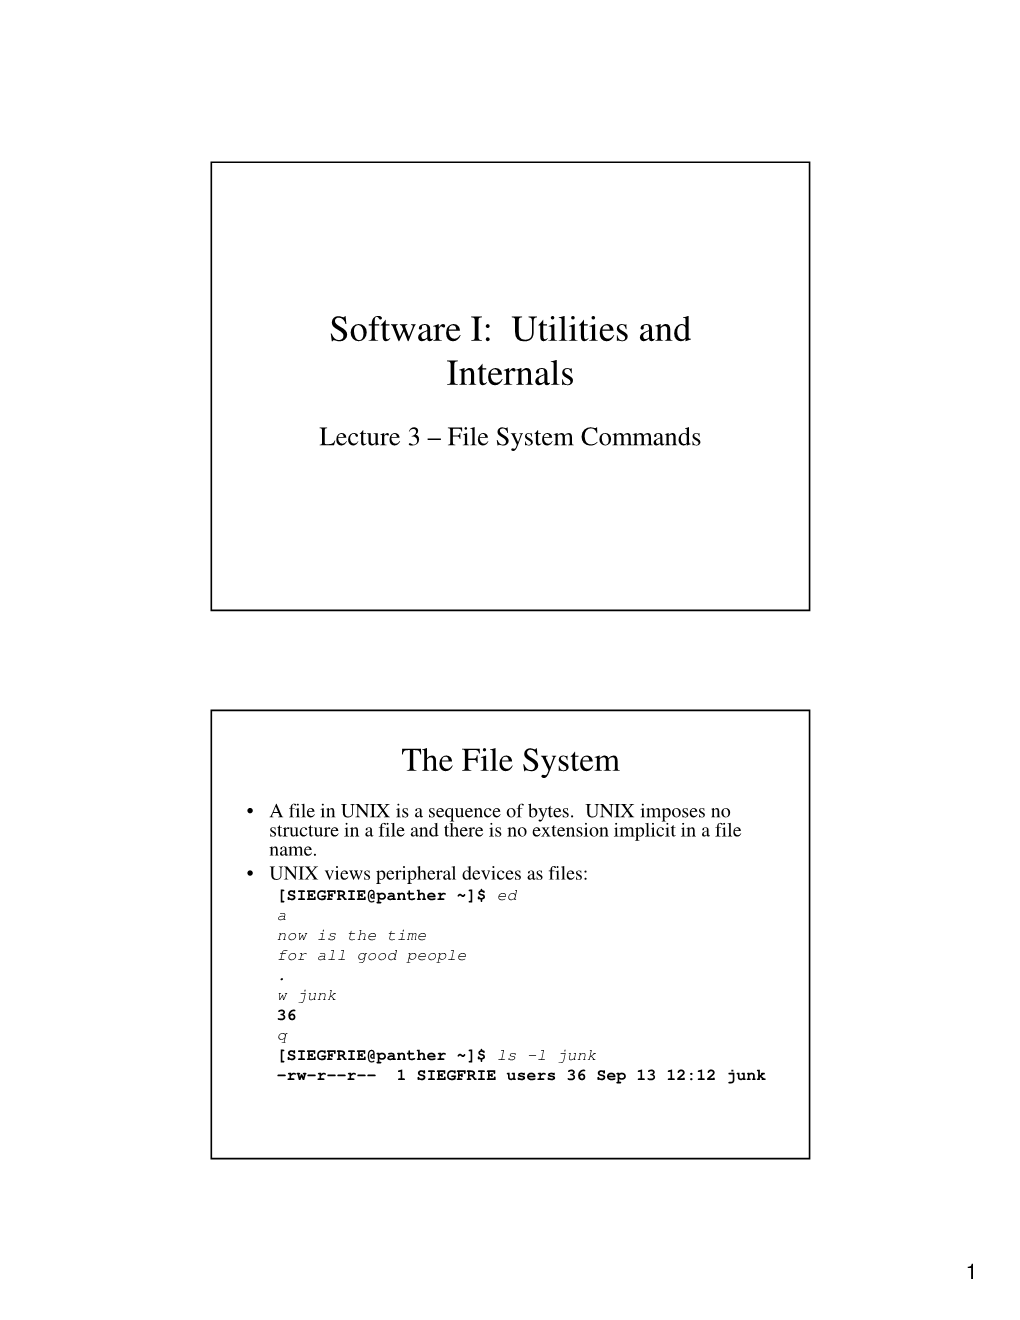 Software I: Utilities and Internals